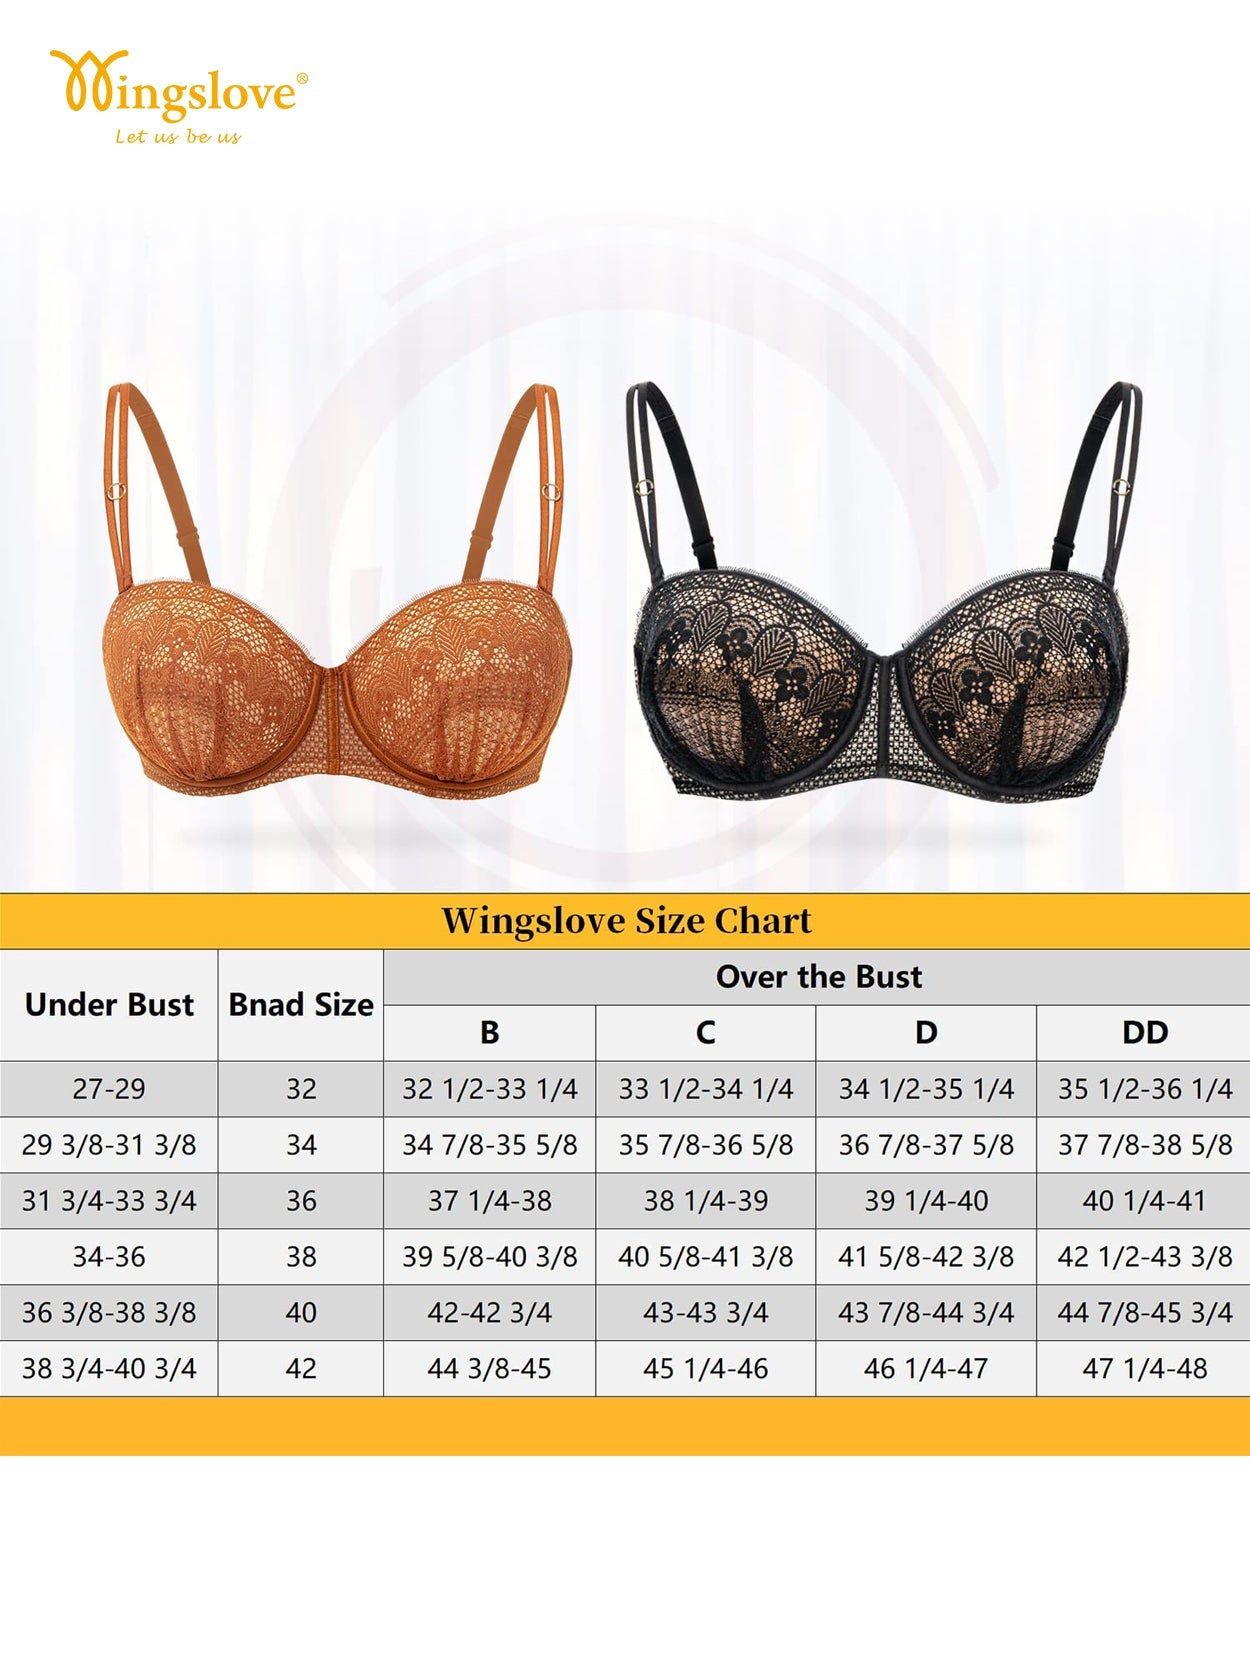 Women's Strapless Bras Lace Non Padded Underwired Multiway Bra 32